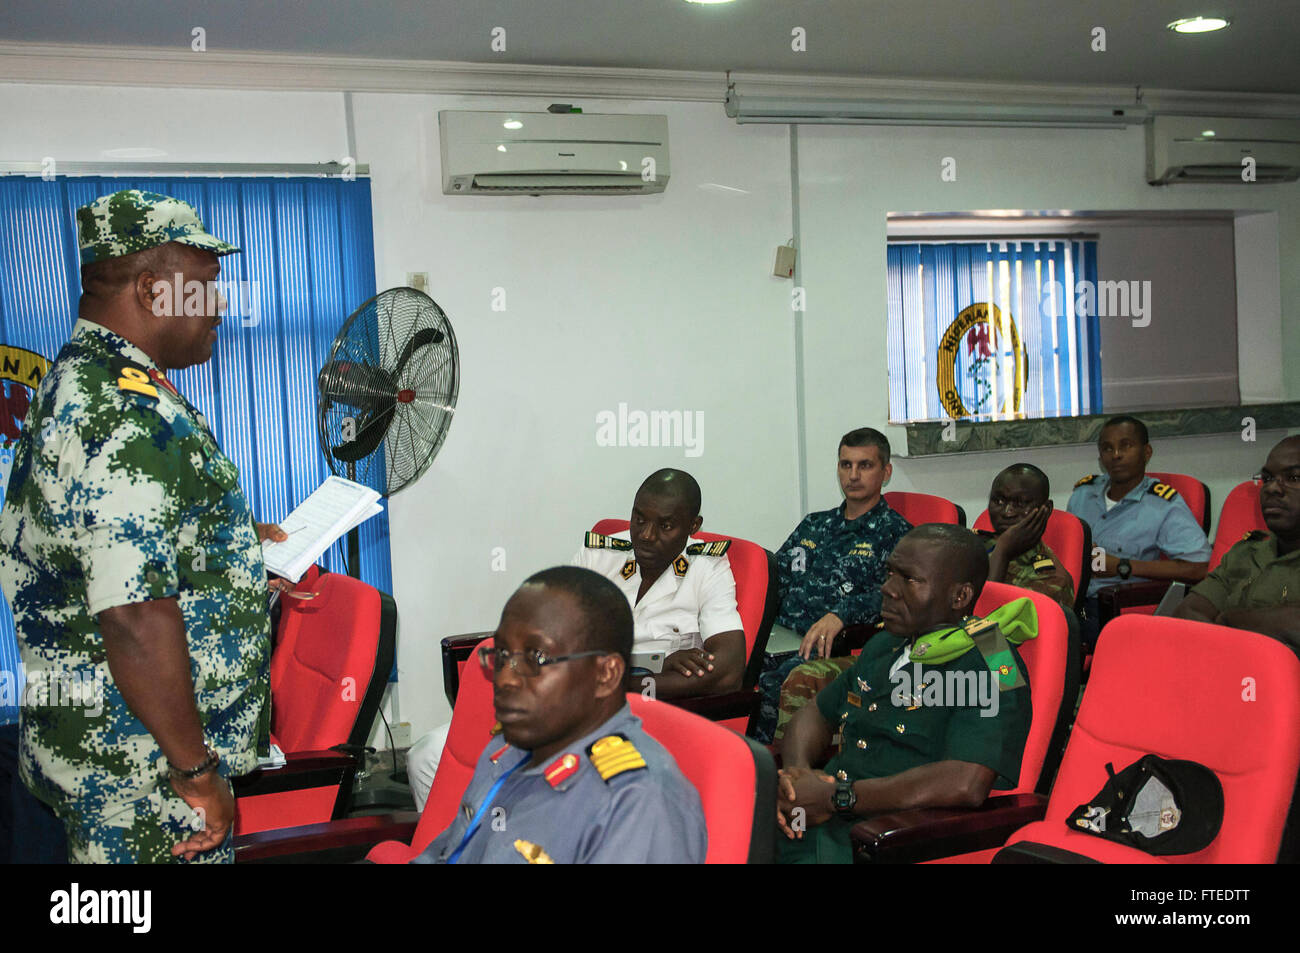 140420-N-ZE250-021 LAGOS, Nigeria (April 20, 2014) - Nigerian navy Commodore AK Owhor-chuku, national multi-force commander of Obangame Express 2014, briefs African military personnel about upcoming events at the exercise headquarters, Nigerian Western Naval Command. Obangame Express is a U.S. Africa Command-sponsored multinational maritime exercise designed to increase maritime safety and security in the Gulf of Guinea.   (U.S. Navy Photo by Mass Communication Specialist Weston Jones/Released)  Join the conversation on <a href='https://twitter.com/naveur navaf' rel='nofollow'>Twitter</a> foll Stock Photo